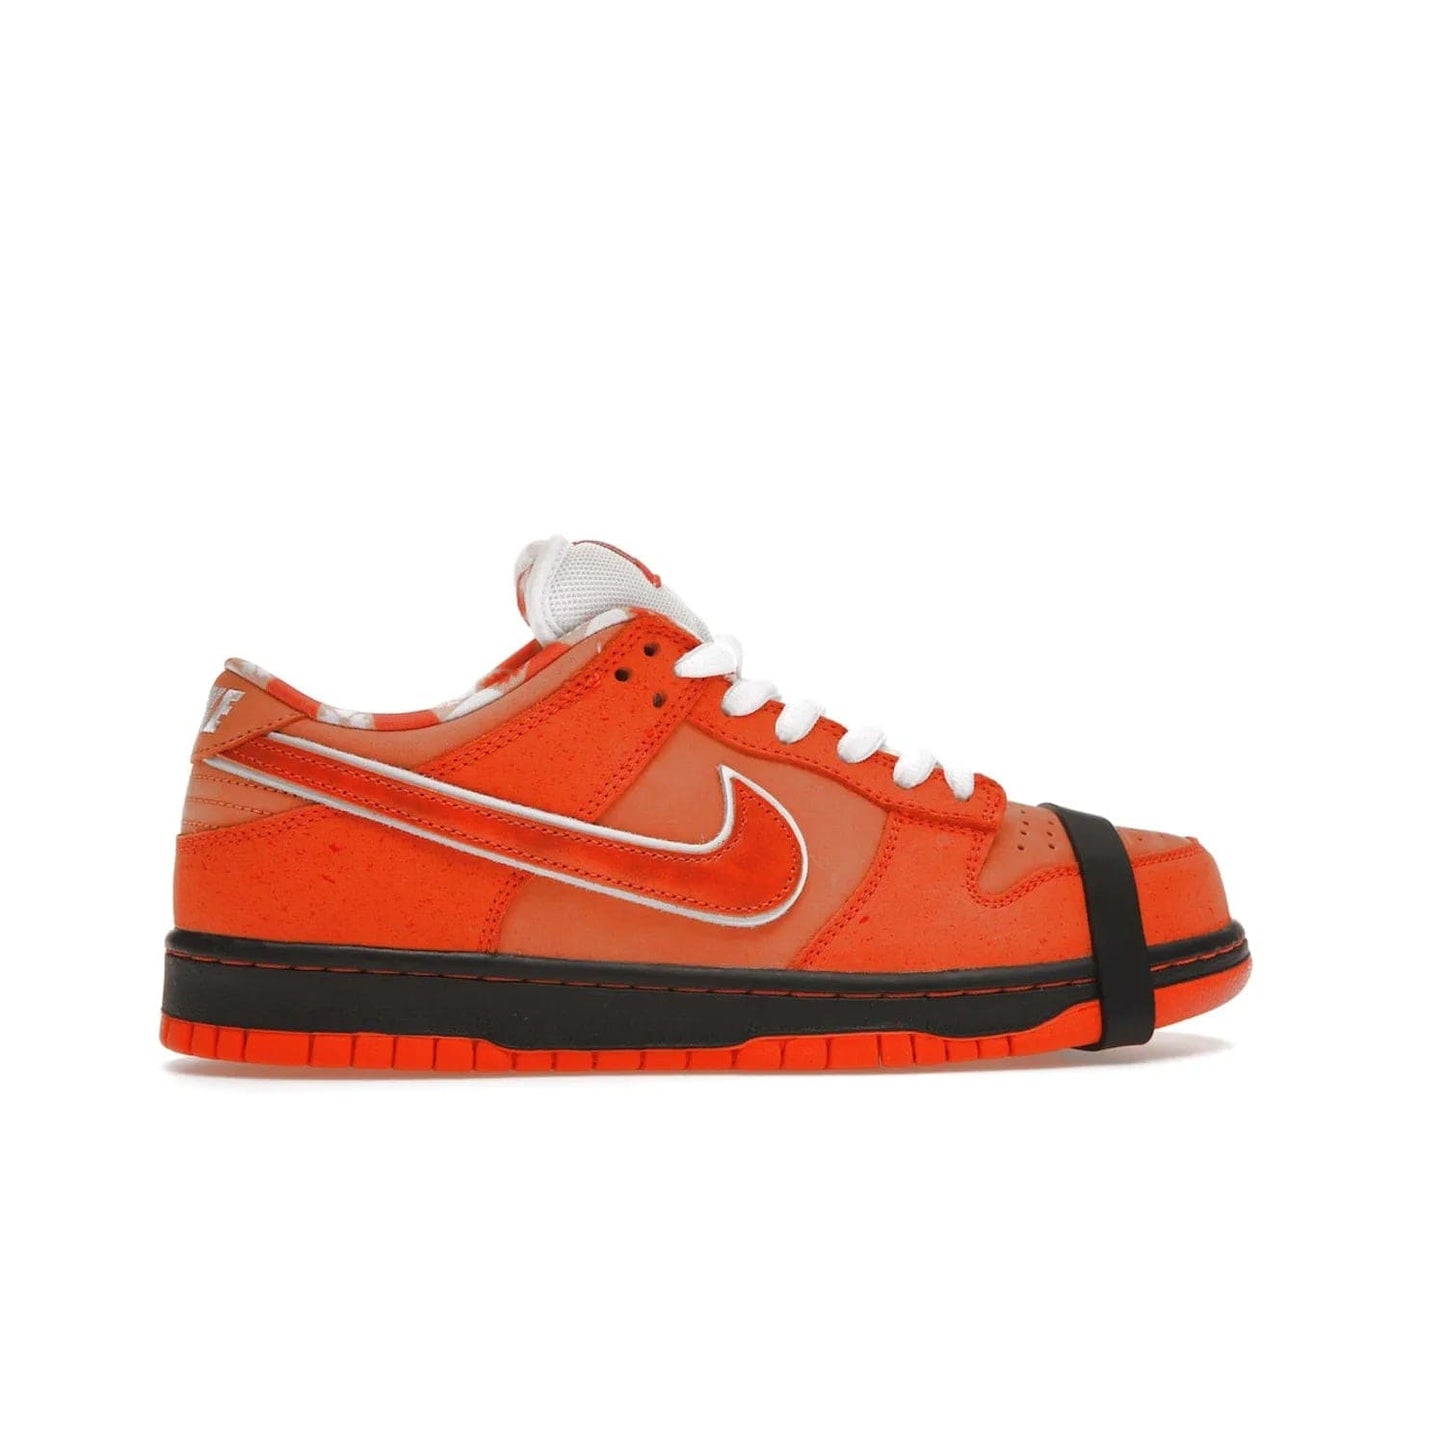 Nike SB Dunk Low Concepts Orange Lobster - Image 36 - Only at www.BallersClubKickz.com - Limited Nike SB Dunk Low Concepts Orange Lobster features premium nubuck upper with vibrant oranges for eye-catching colorblocked design. Signature Nike SB tag and bib-inspired interior for added texture. Outsole and cupsole provide extra reinforcement. Get it 12/20/2022.